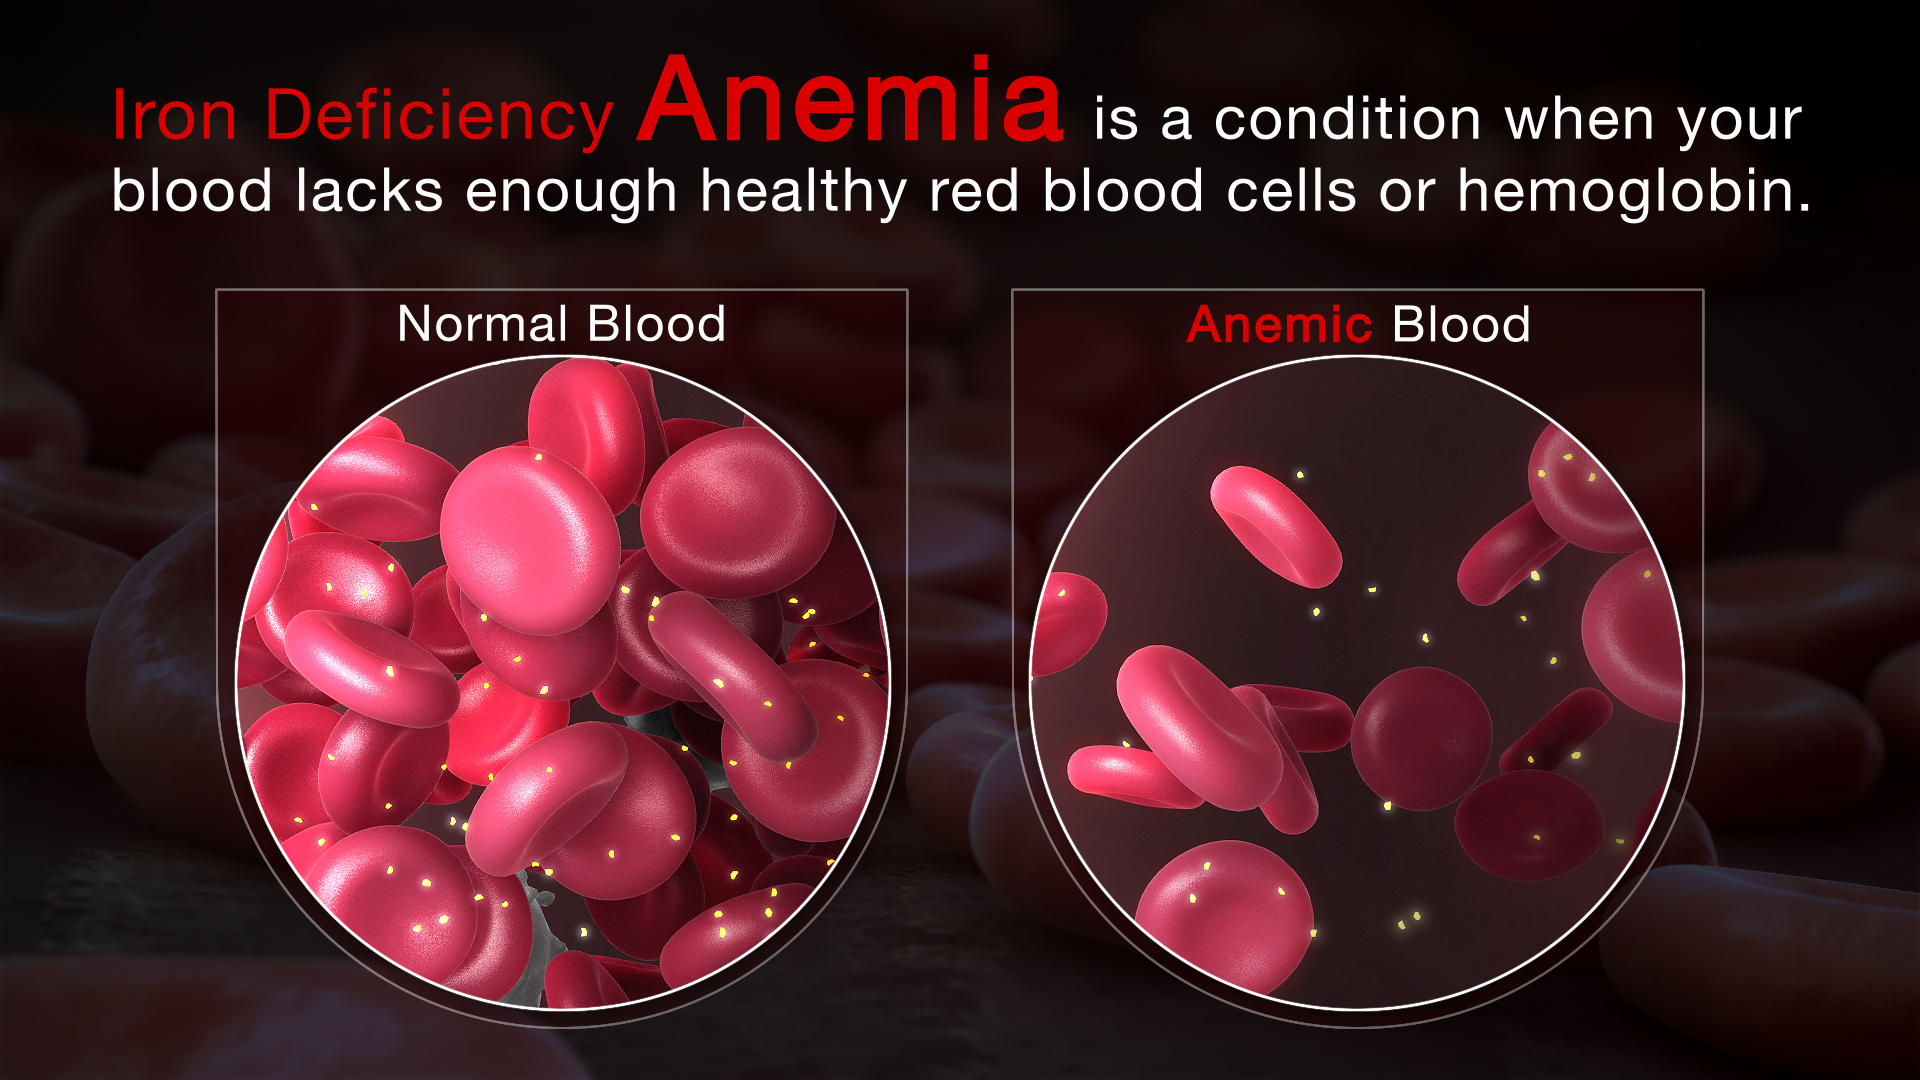 Comparison between Normal Blood and Anemic Blood